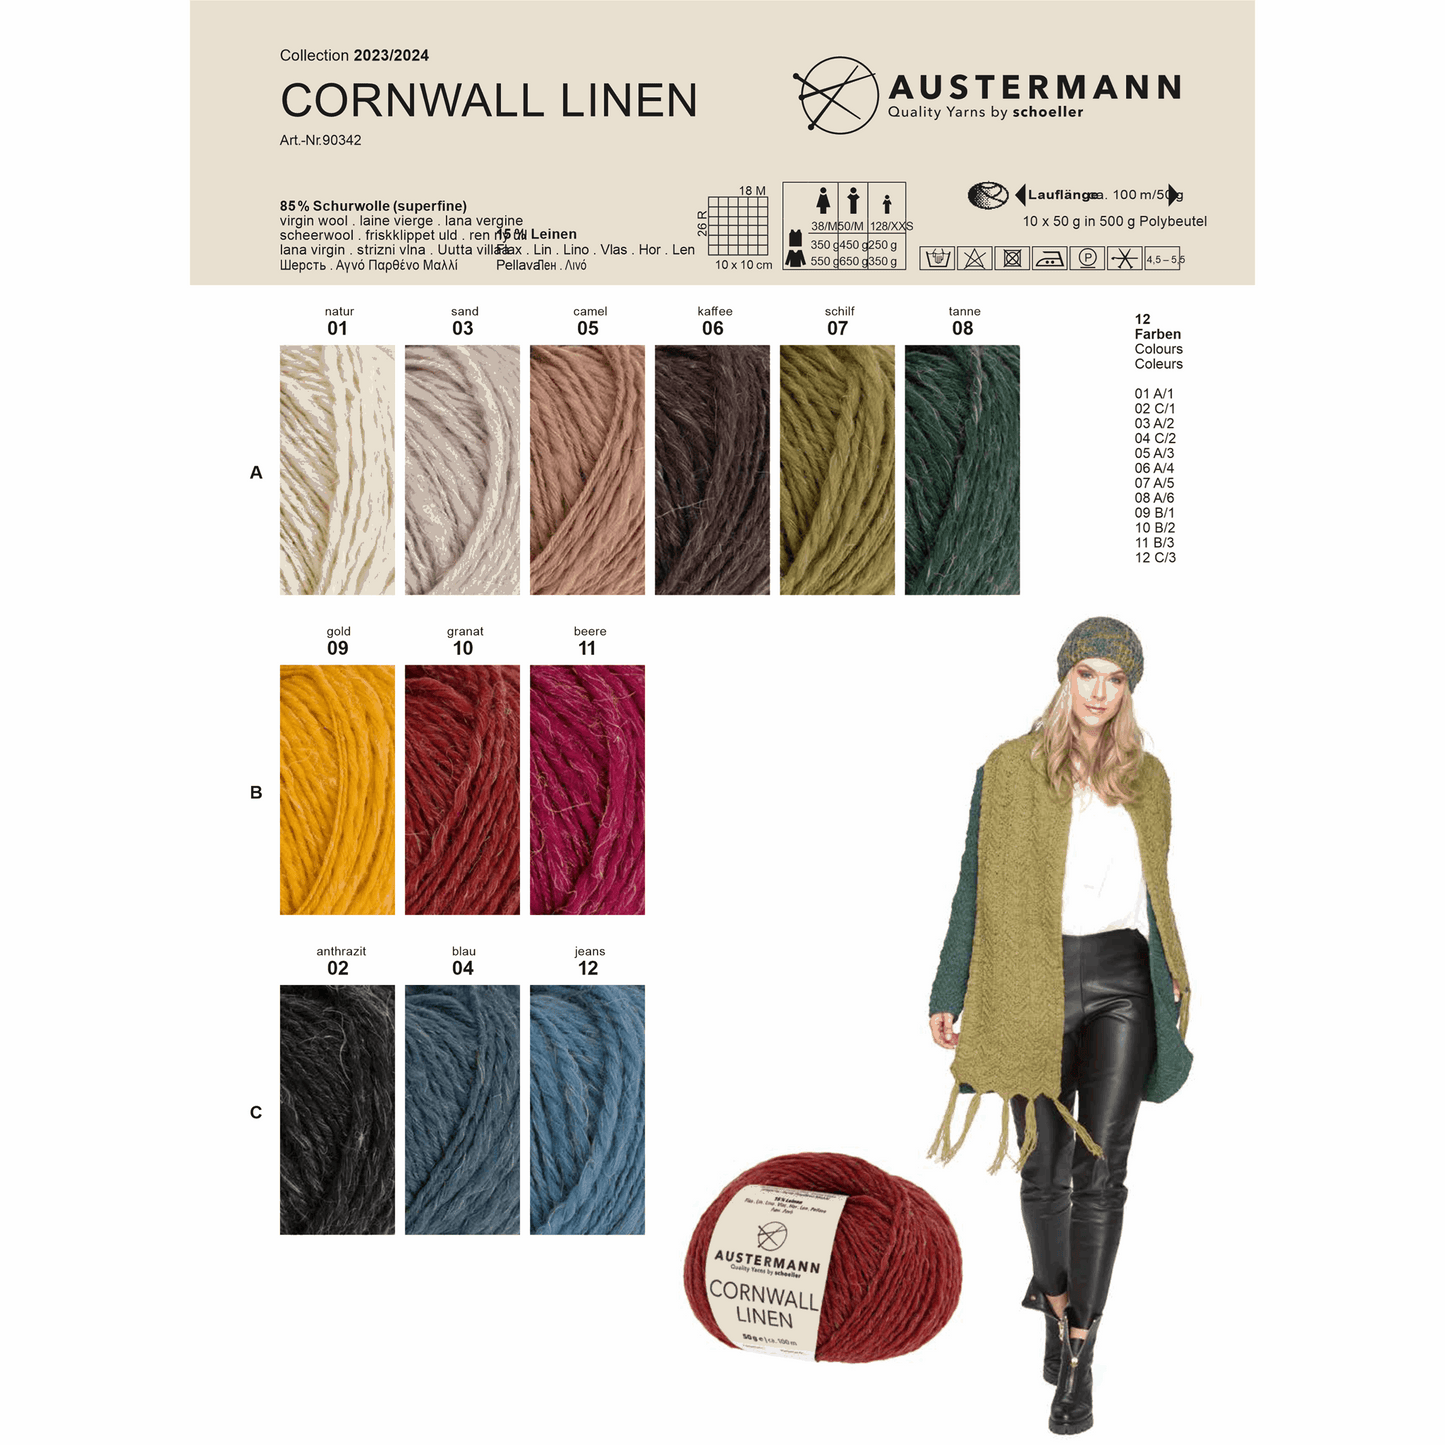 Cornwall Linen 50g, 90342, color 12, jeans